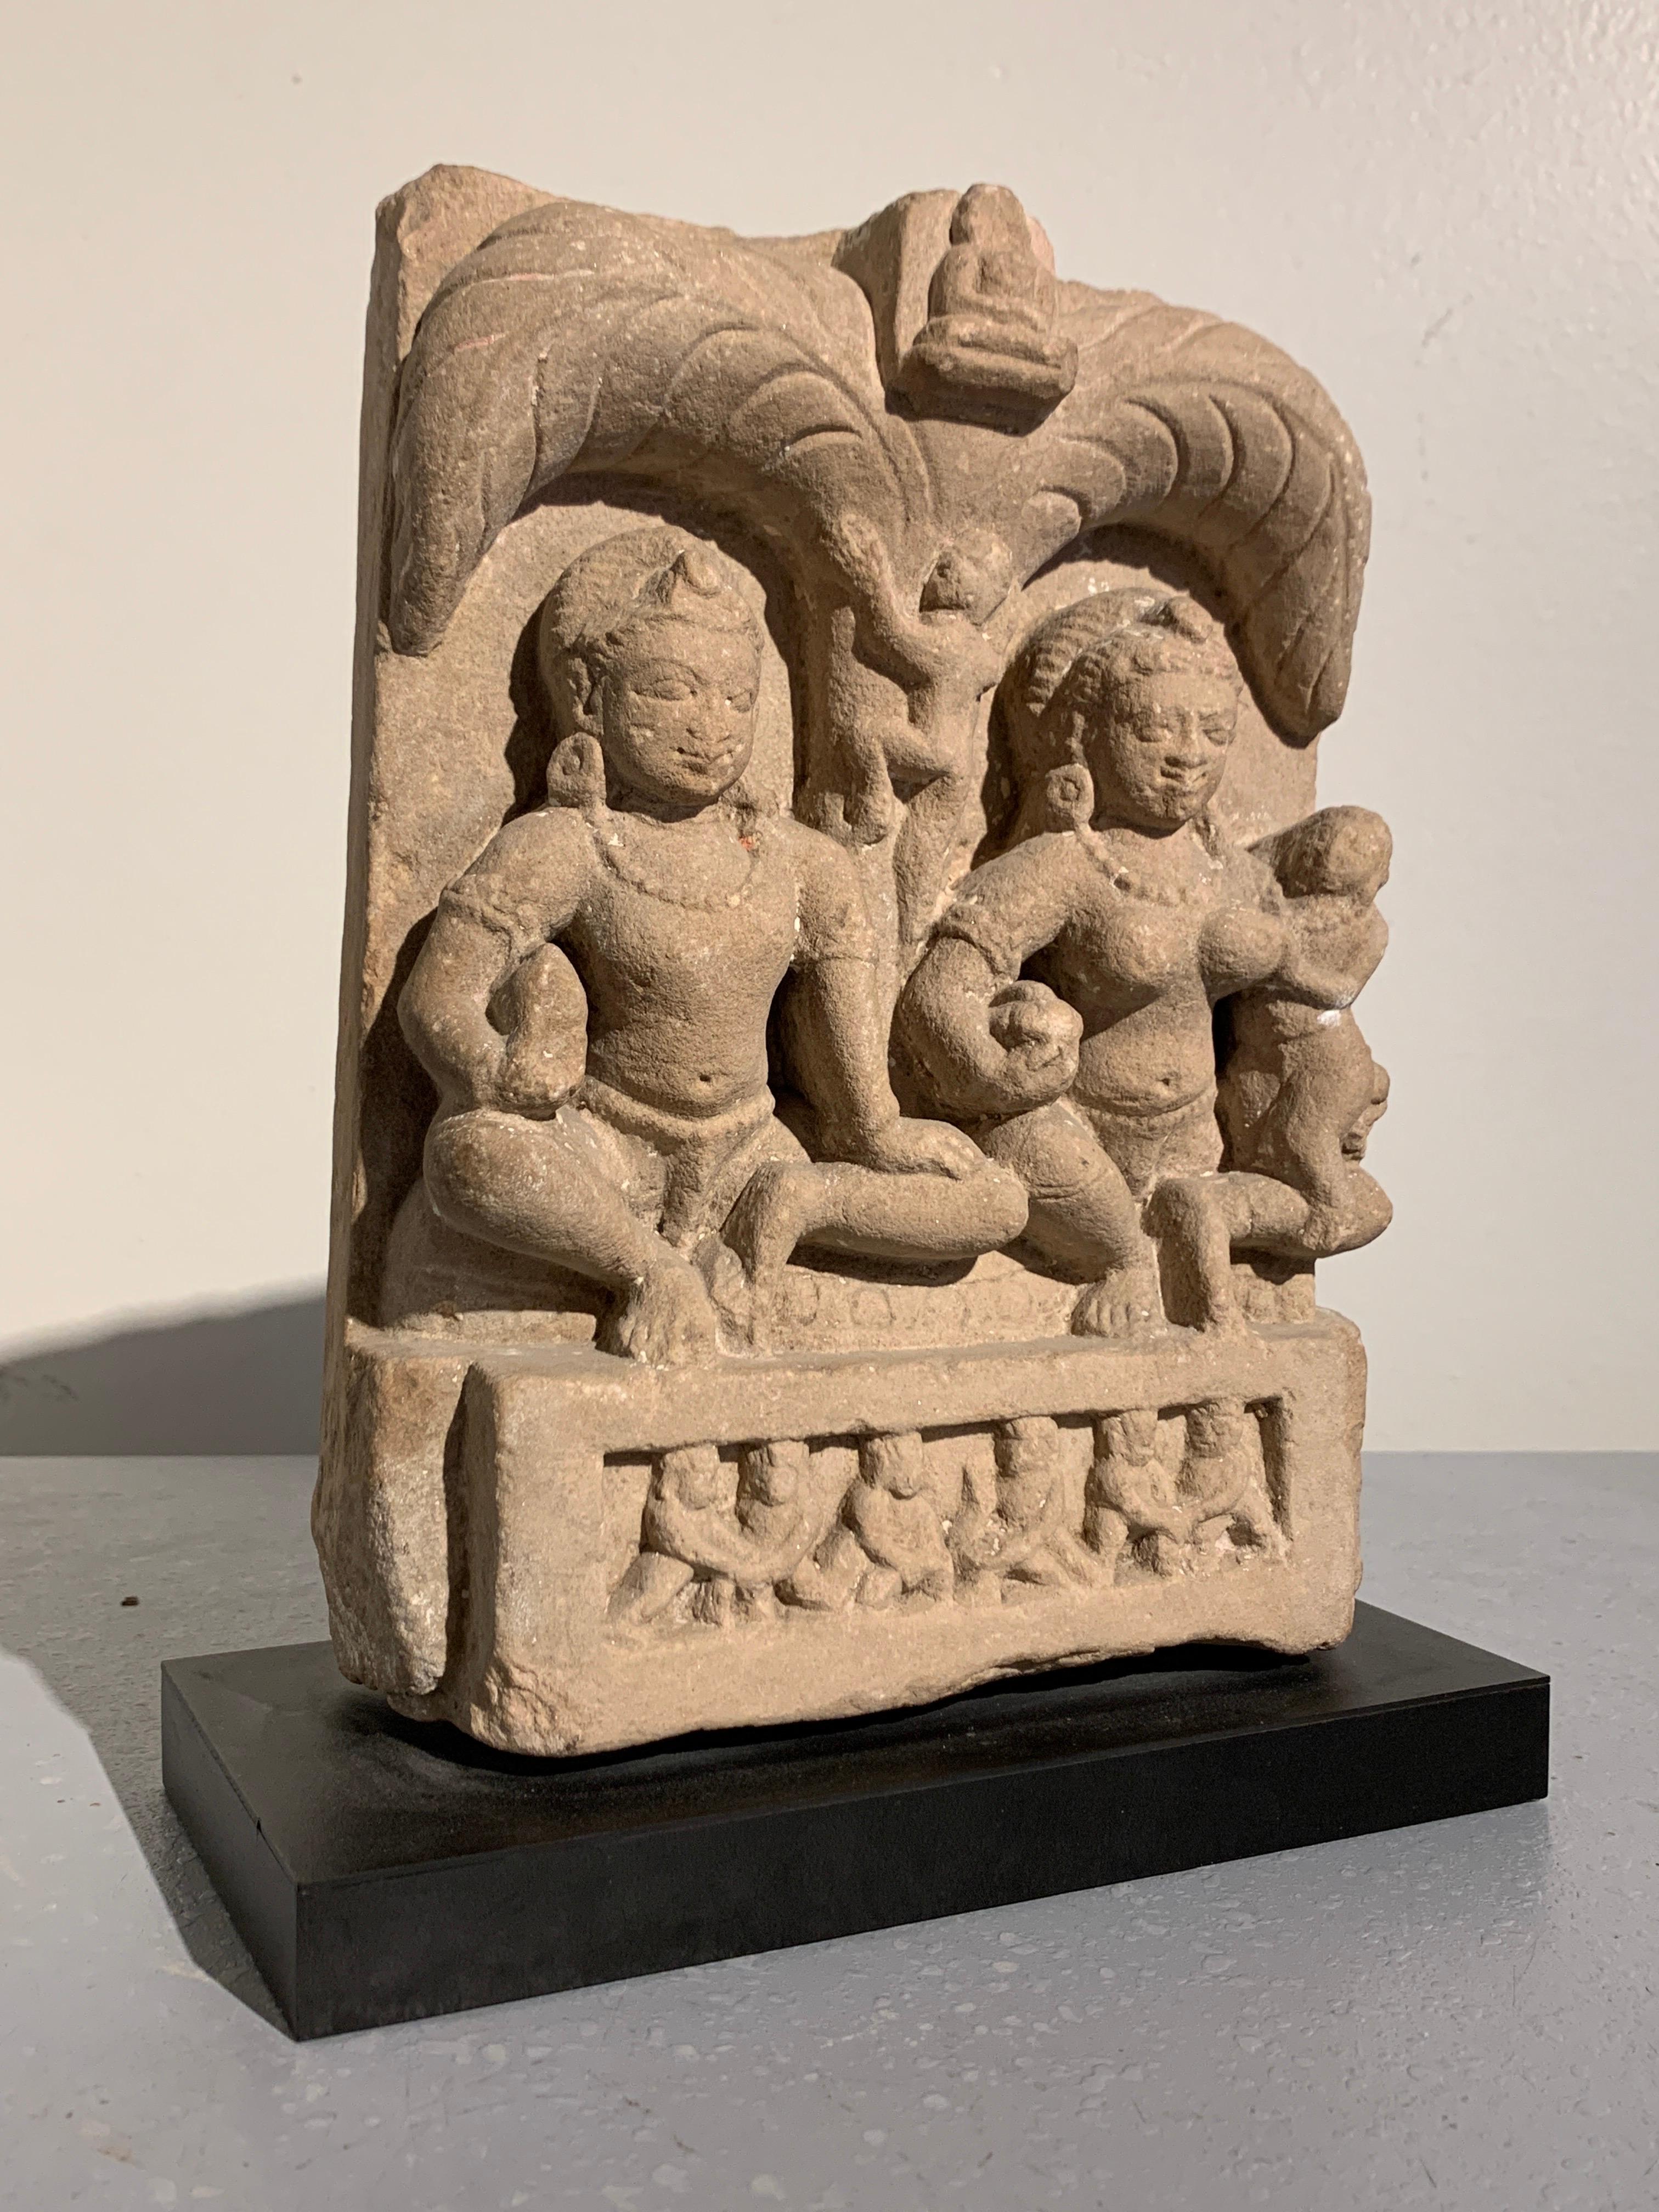 A fine and rare Indian carved sandstone stele of a Jain family group, Sarnath style, early Indian Medieval period, 6th-7th century, Uttar Pradesh, India.

Carved from a single block of buff sandstone, the stele features a Jain family group comprised